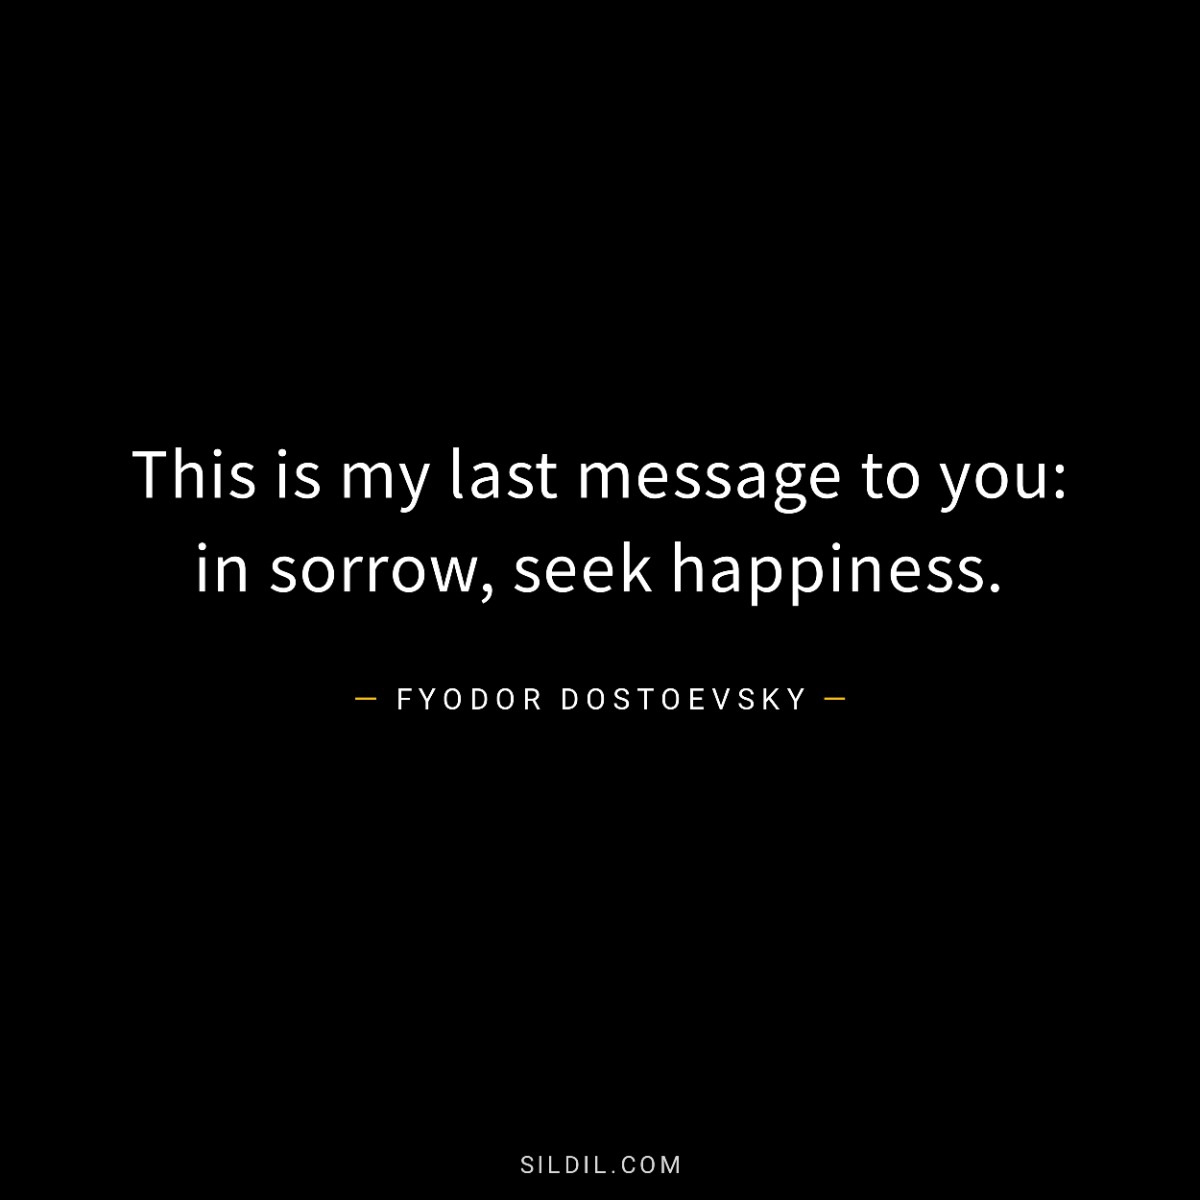 This is my last message to you: in sorrow, seek happiness.